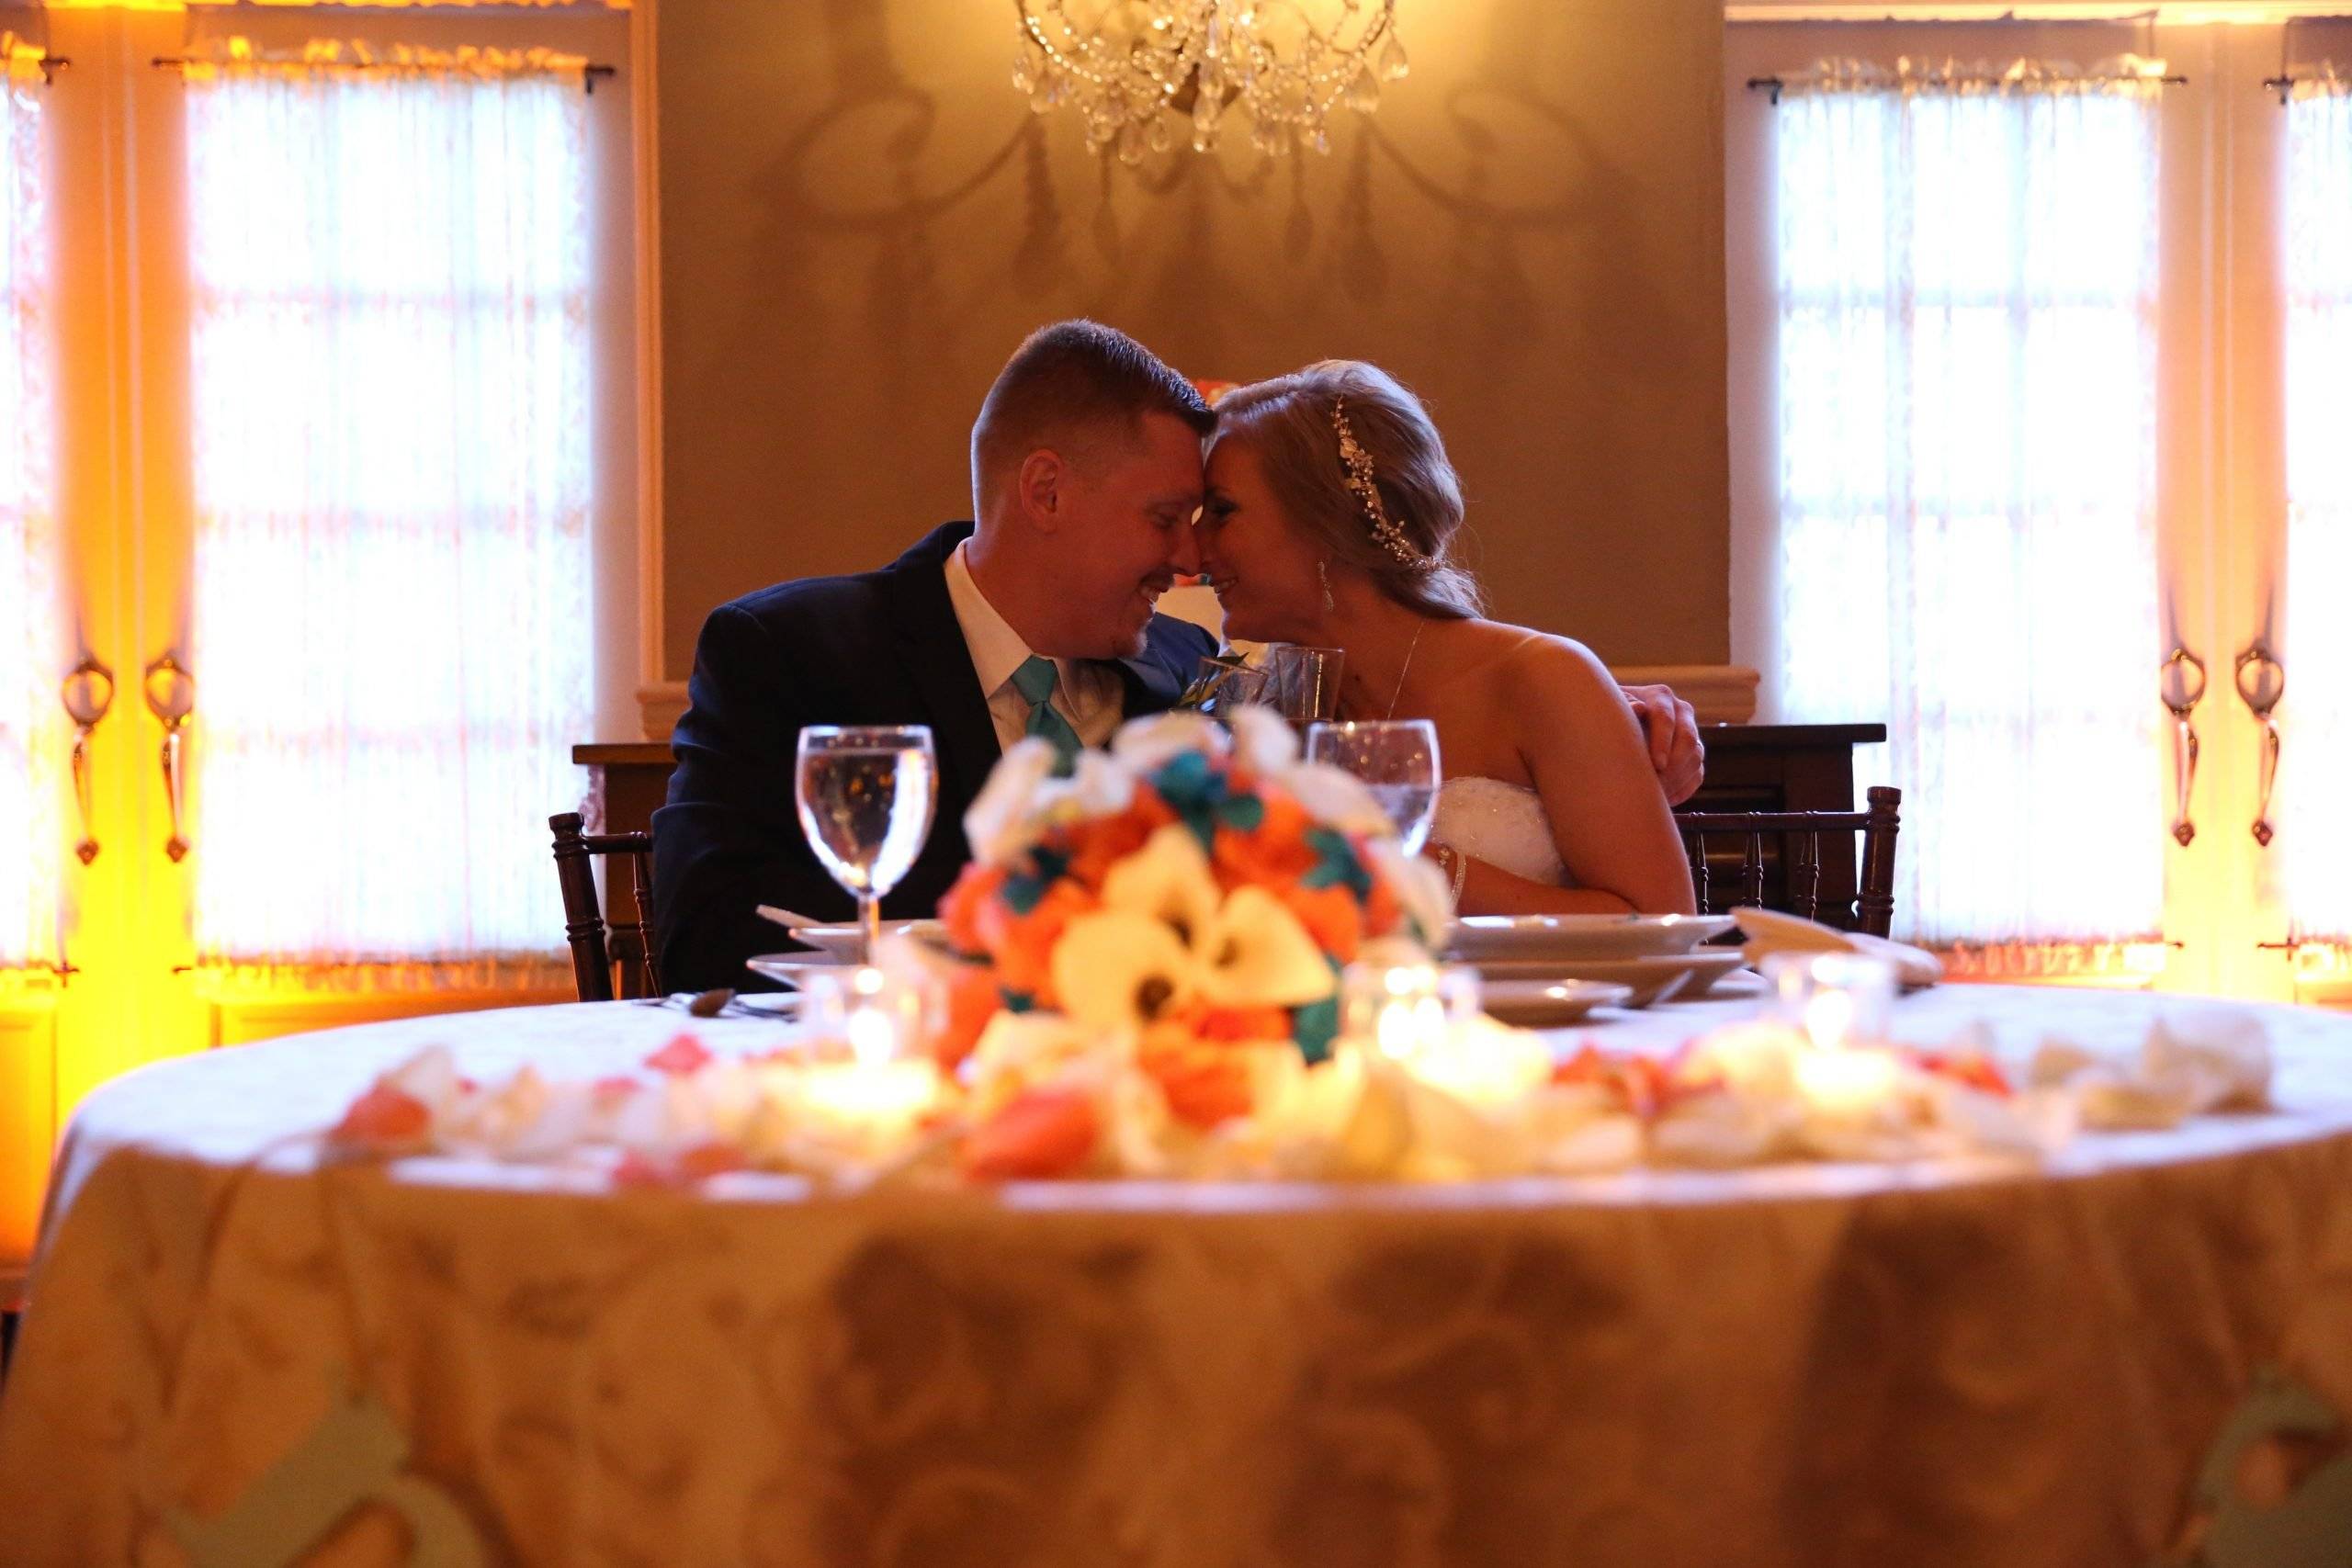 A bride and groom kissing at their wedding table.